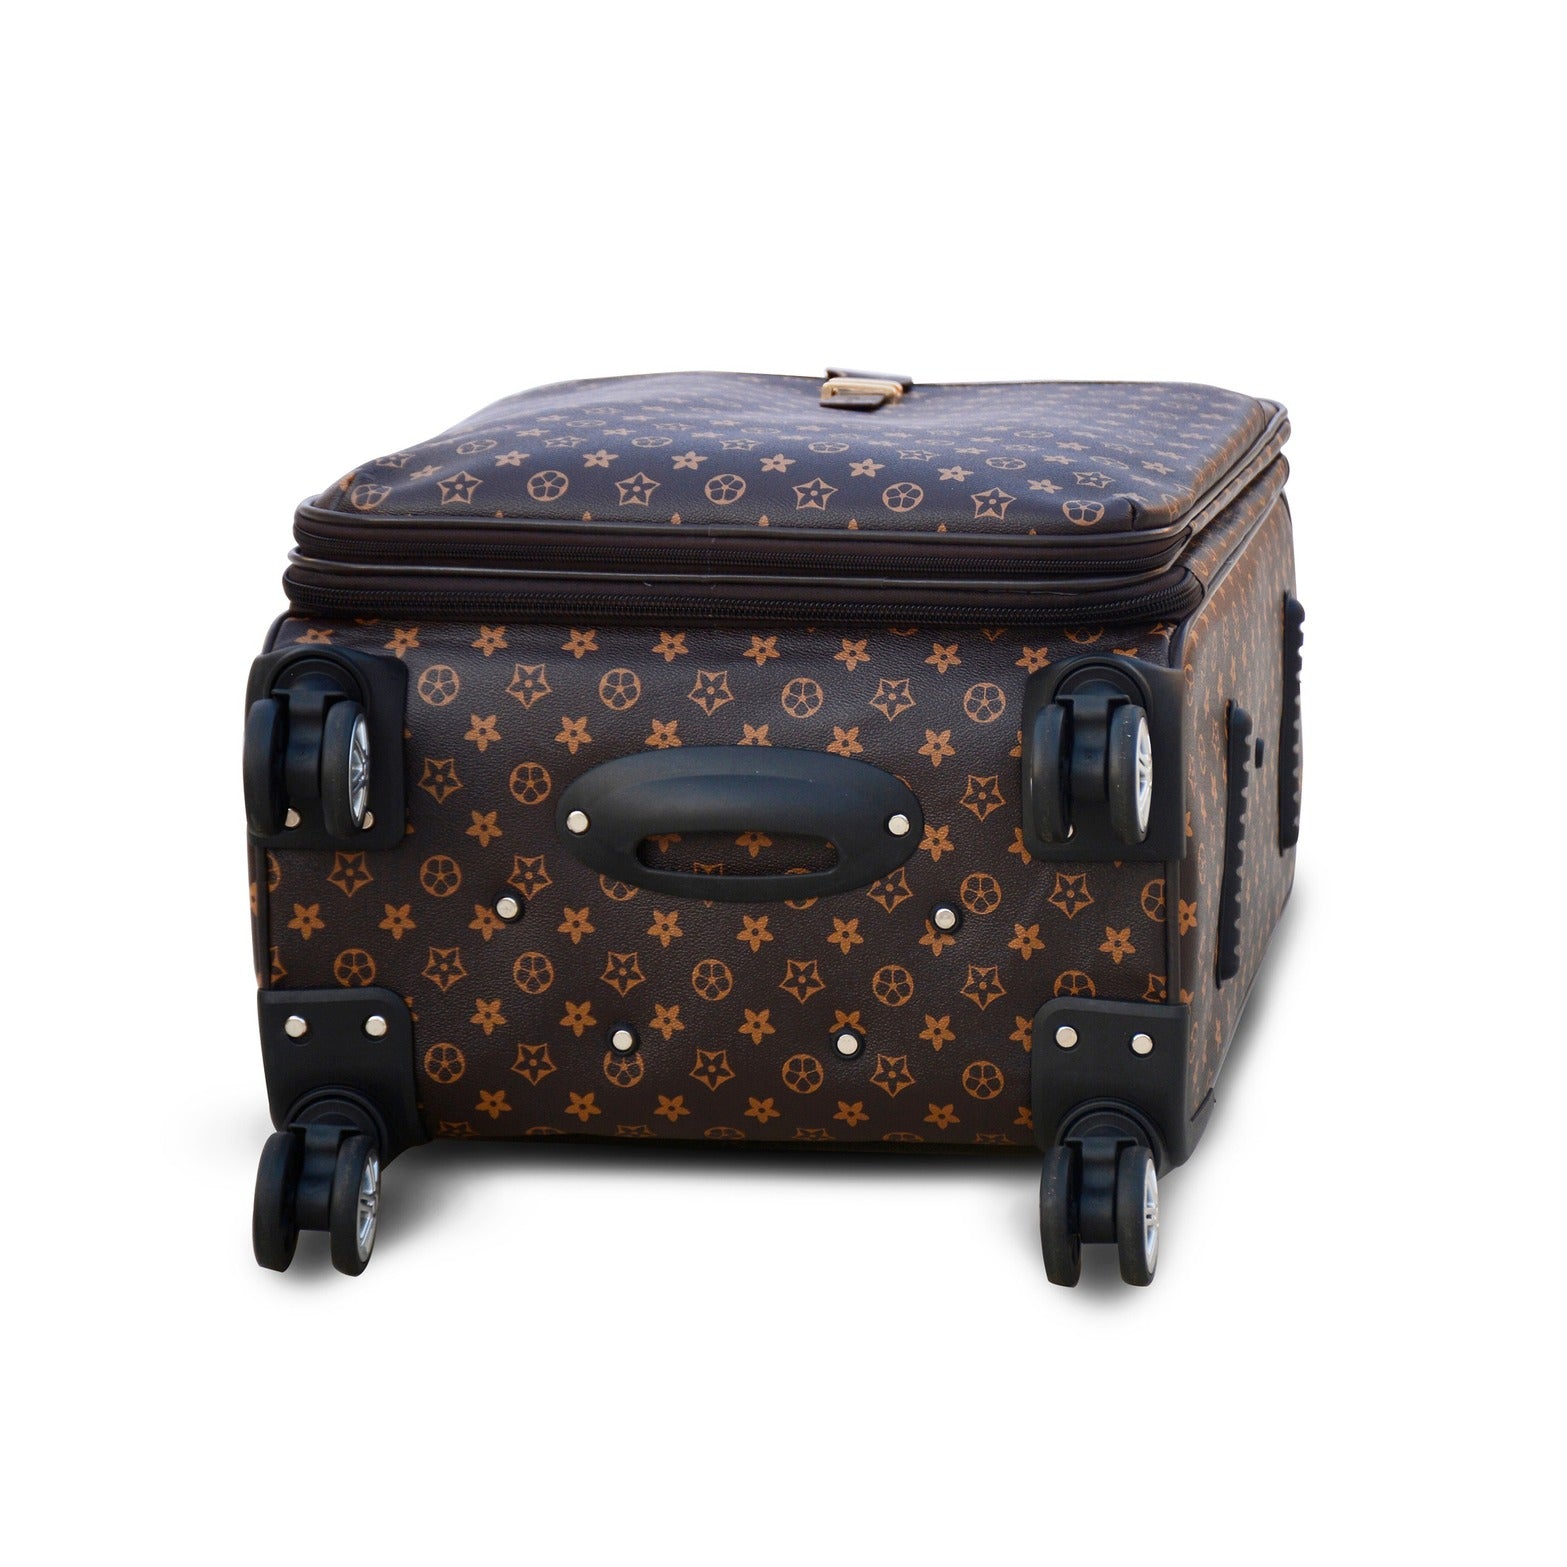 3 Piece Full Set 20" 24" 28 Inches Brown Colour LVR PU Leather Luggage Lightweight Trolley Bag with Spinner Wheel